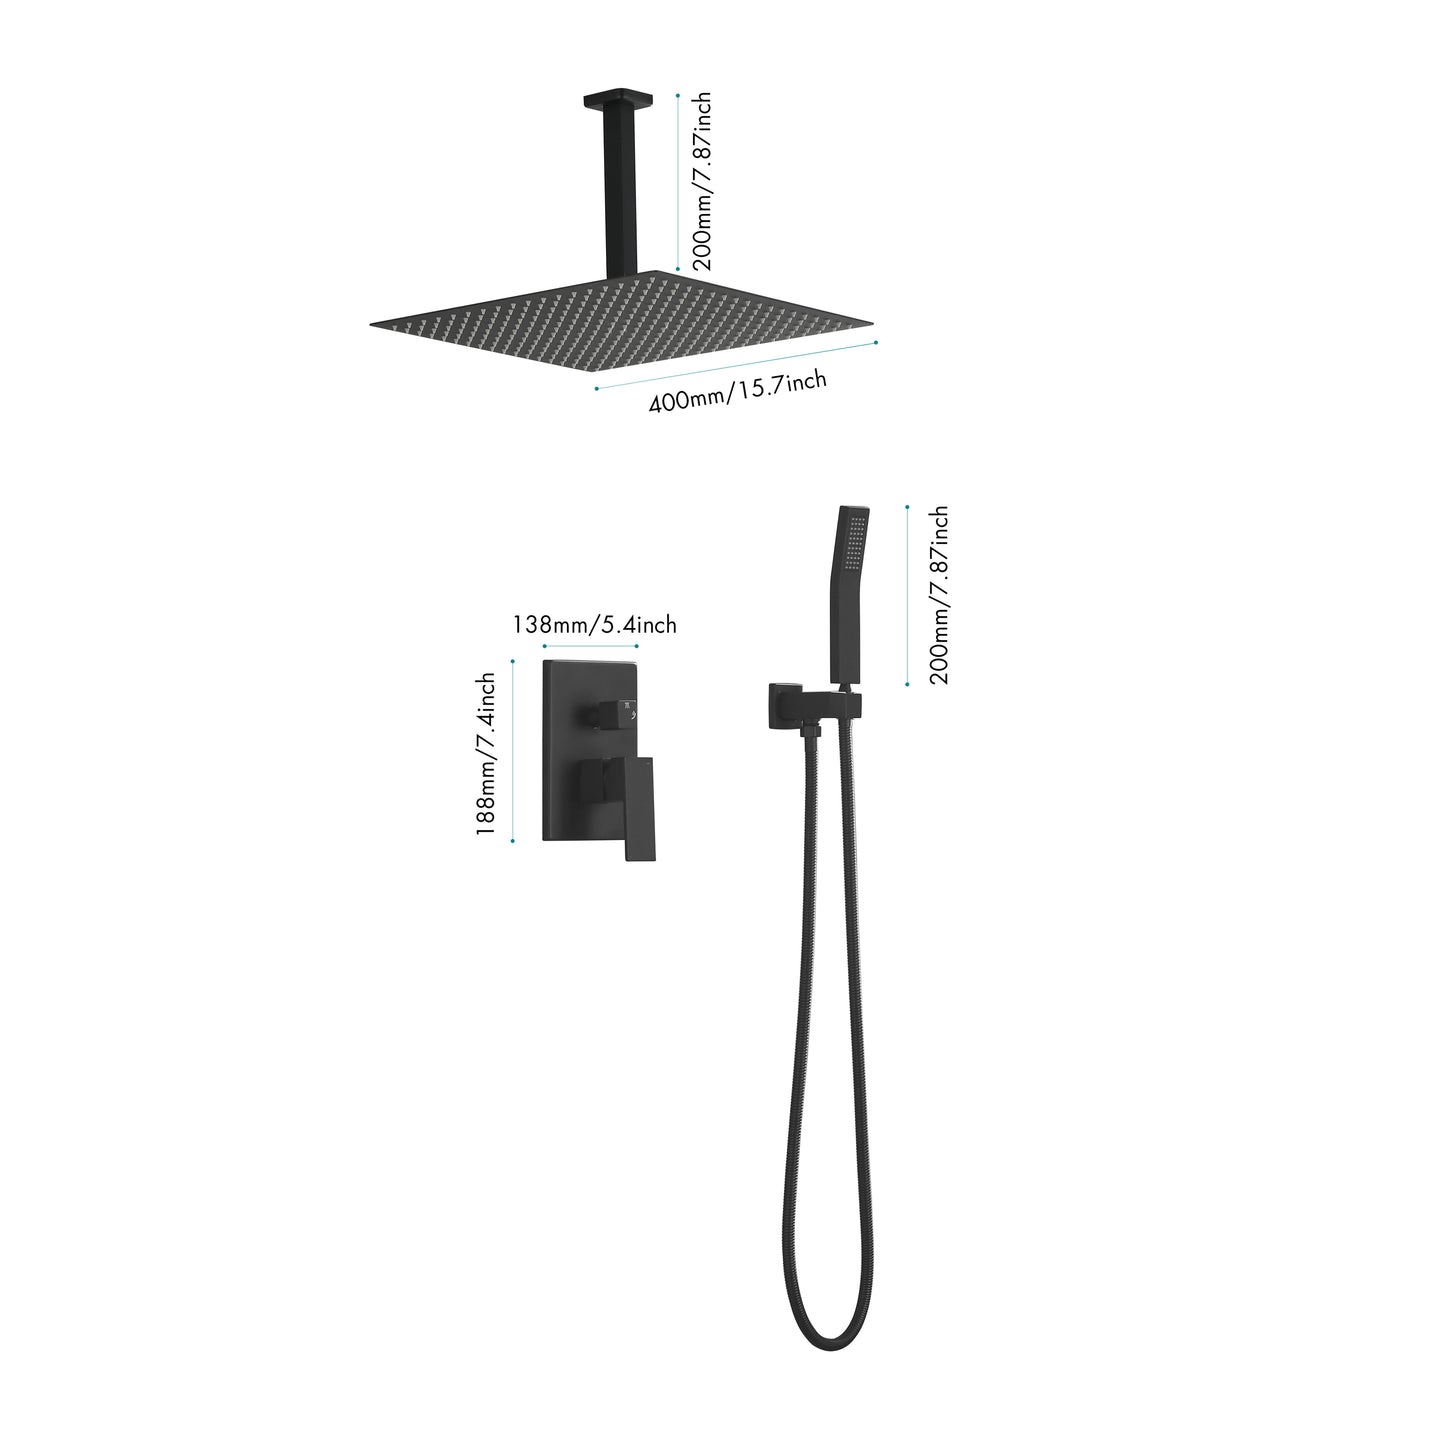 16 Inches Matte Black Shower Set System Bathroom Luxury Rain Mixer Shower Combo Set Ceiling Mounted Rainfall Shower Head Faucet (Contain Shower Faucet Rough-In Valve Body and Trim)